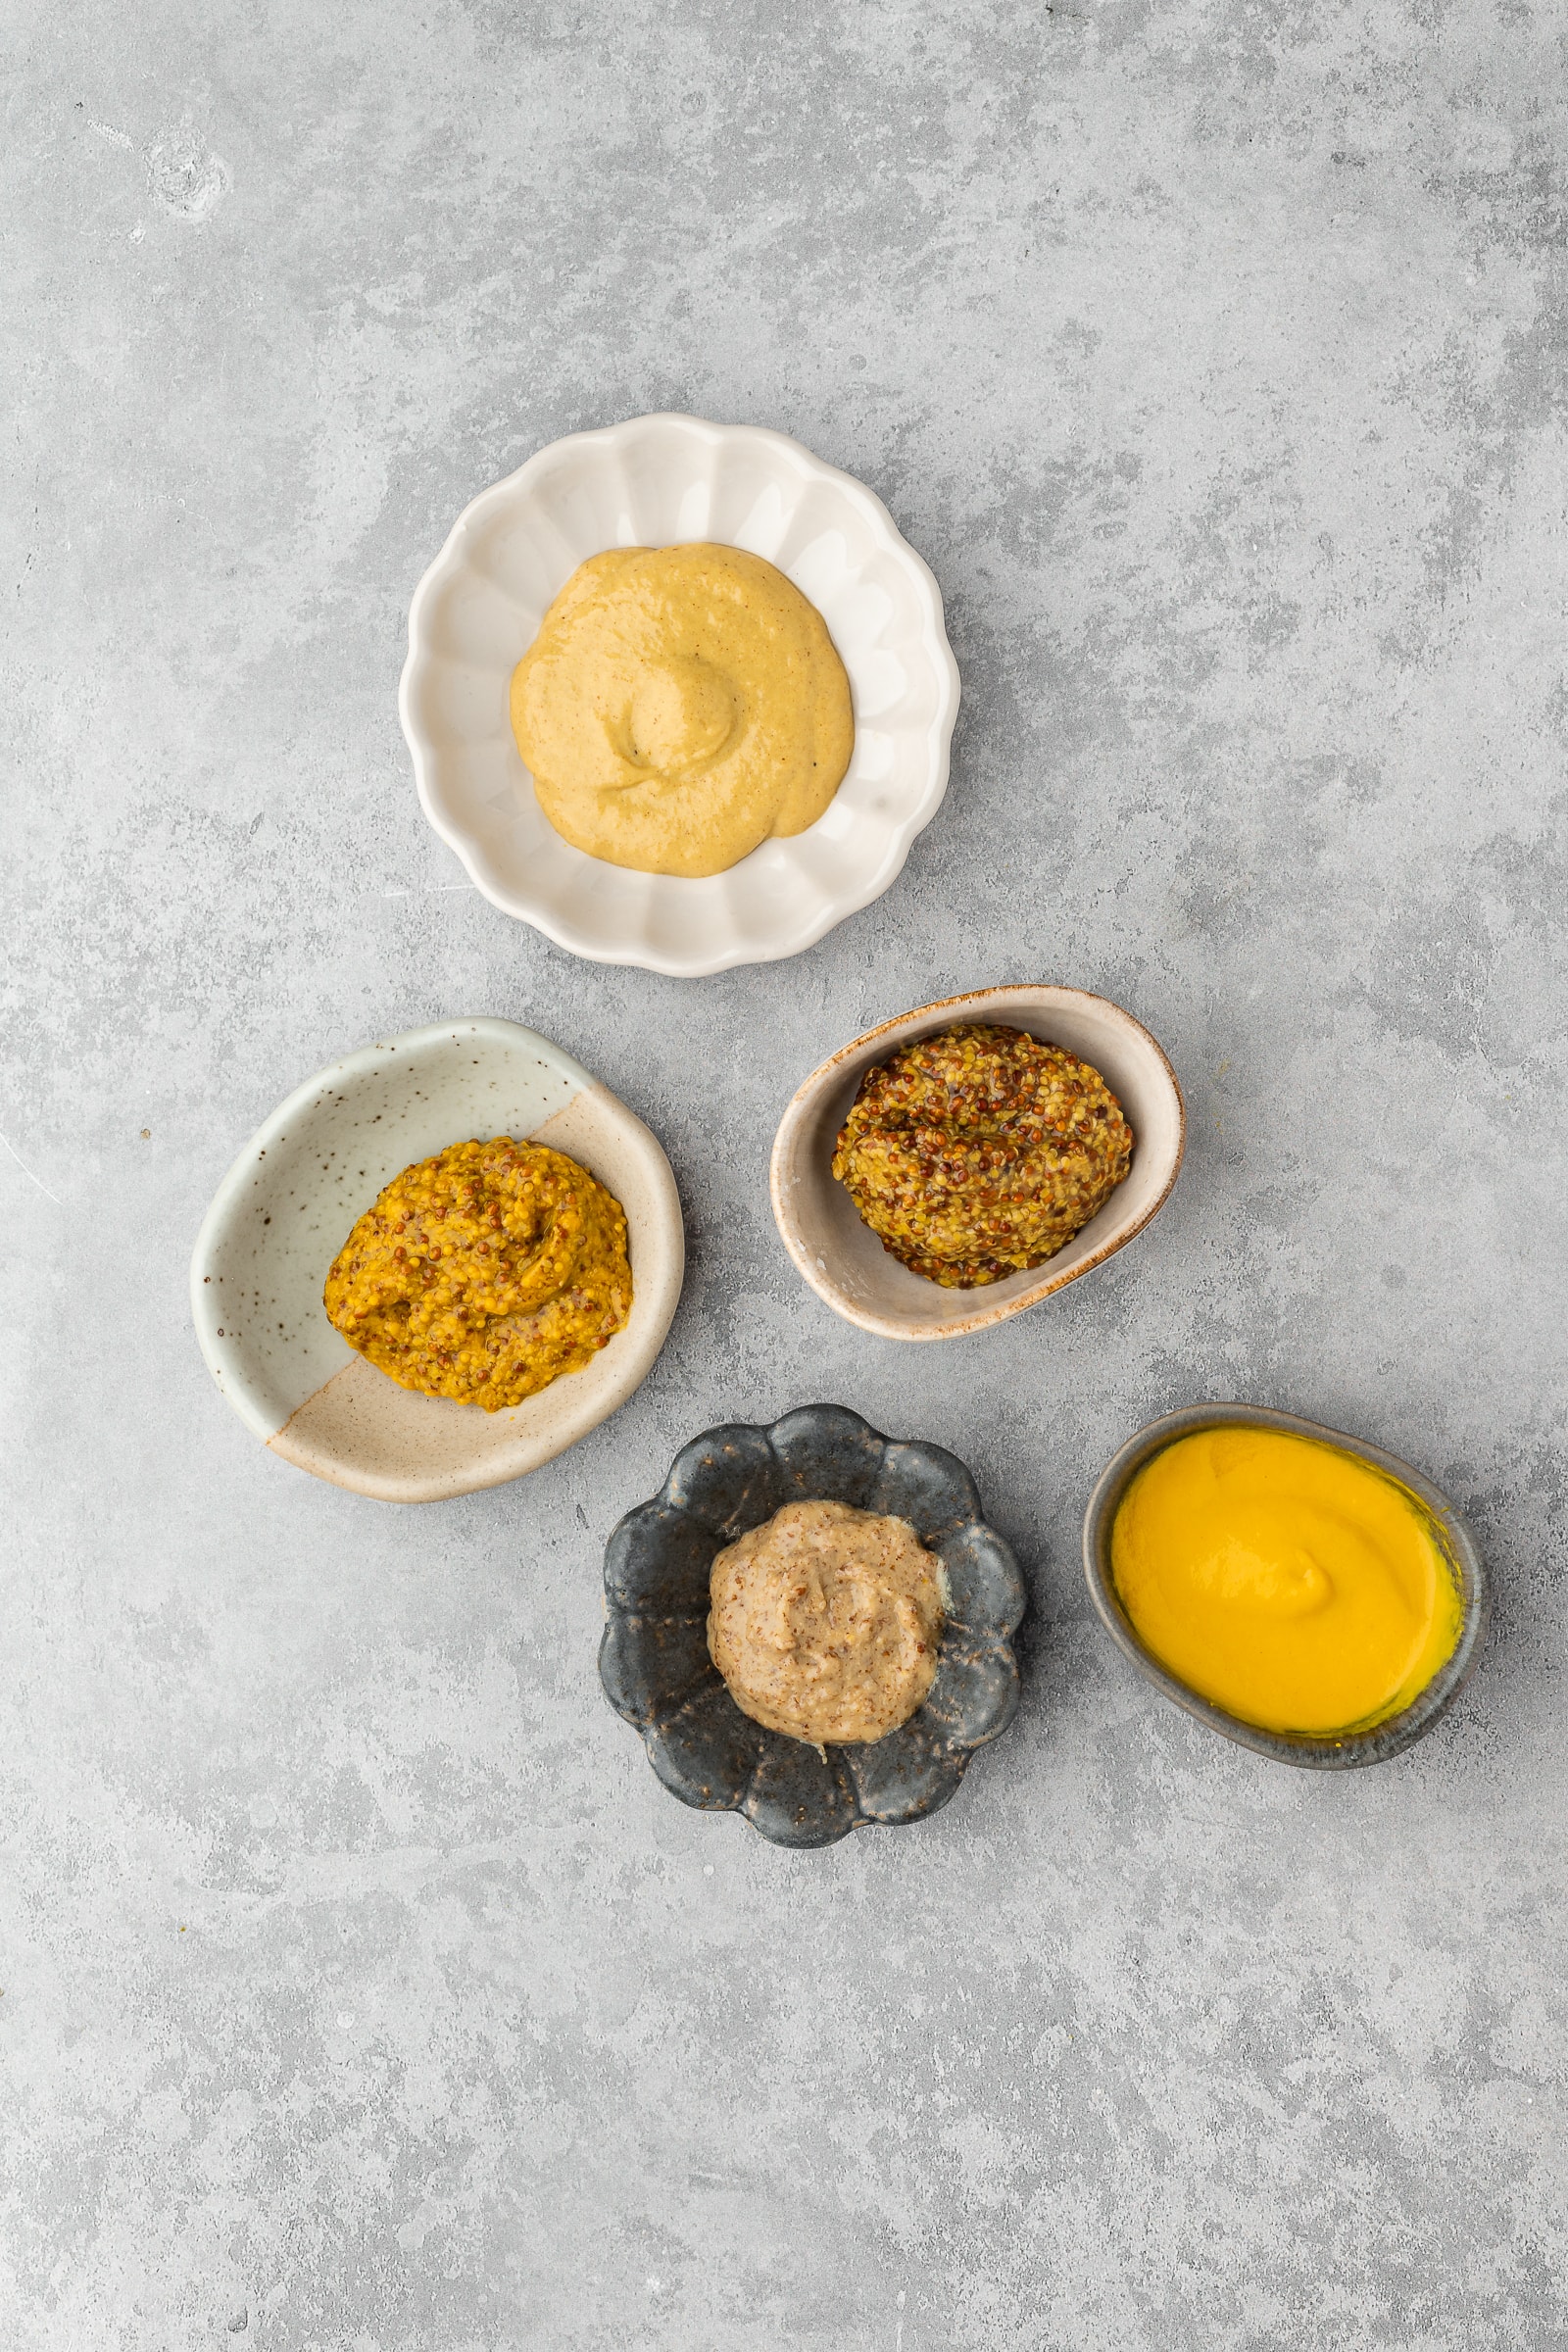 Multiple mustards in small dishes to show texture.